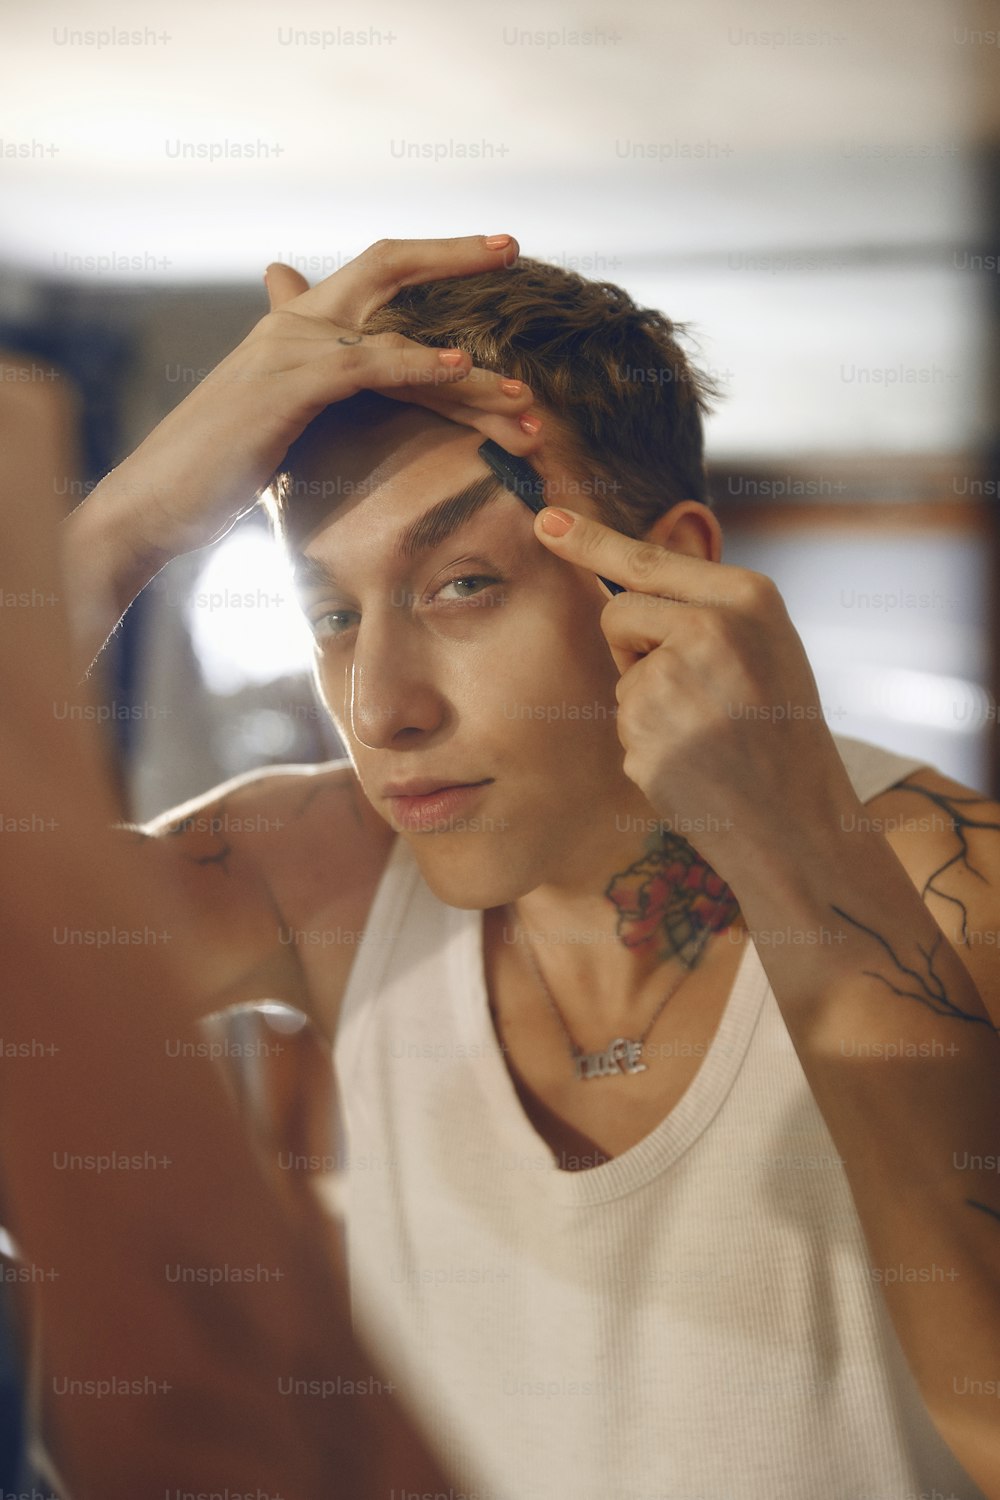 a man with a tattoo on his arm is looking in a mirror